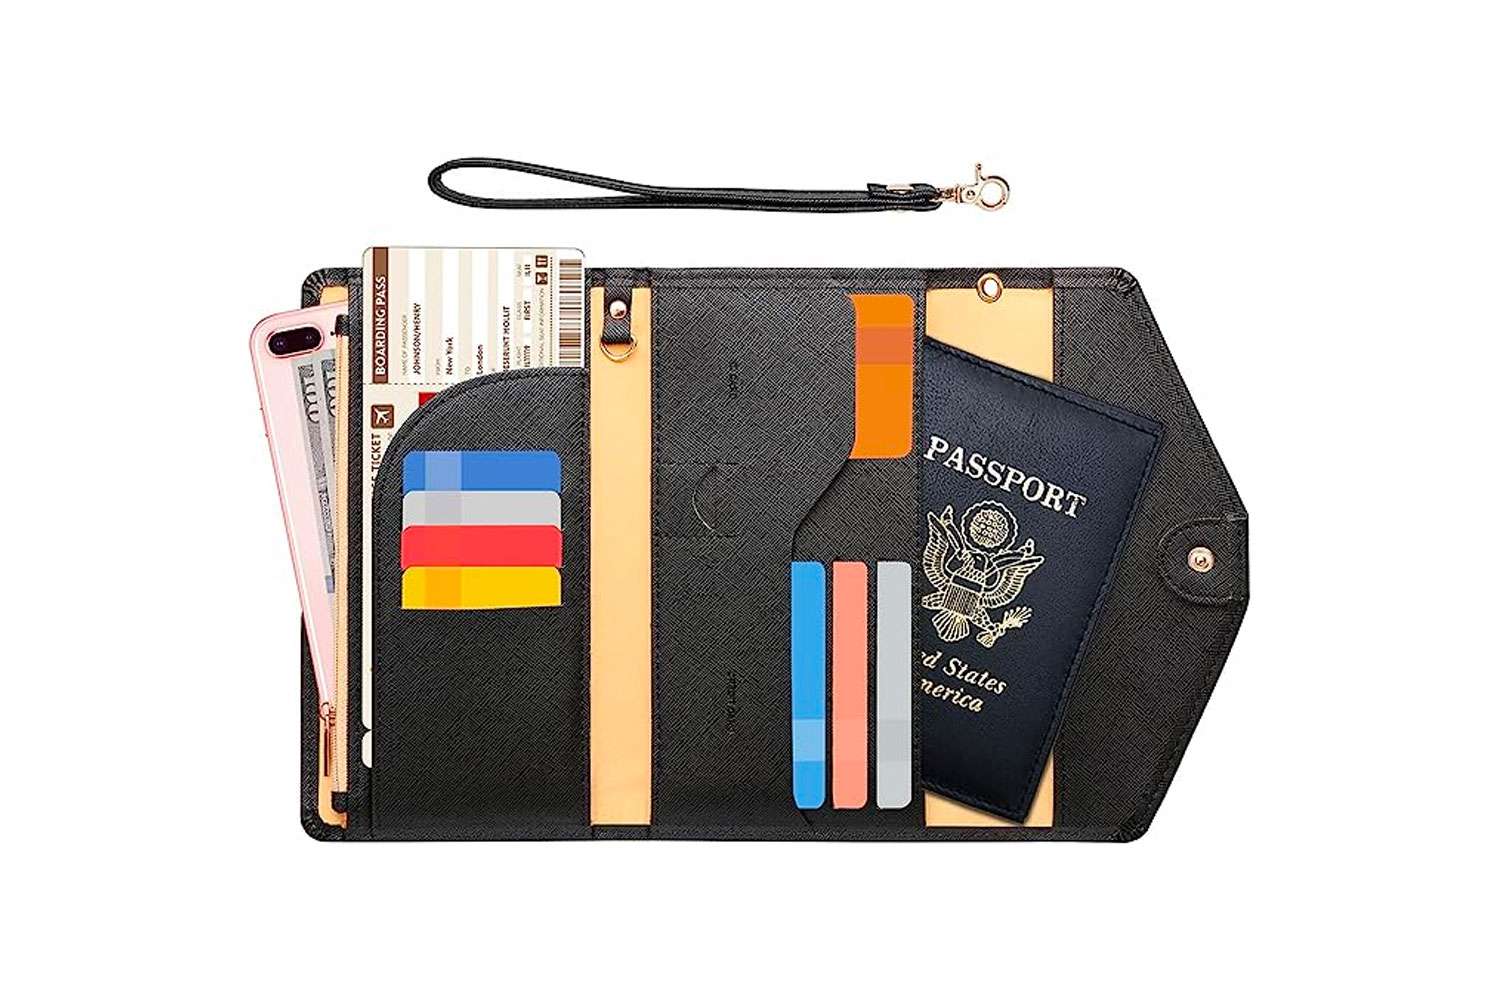 family-gadgets.ru Best Sellers: The most popular items in Passport Wallets